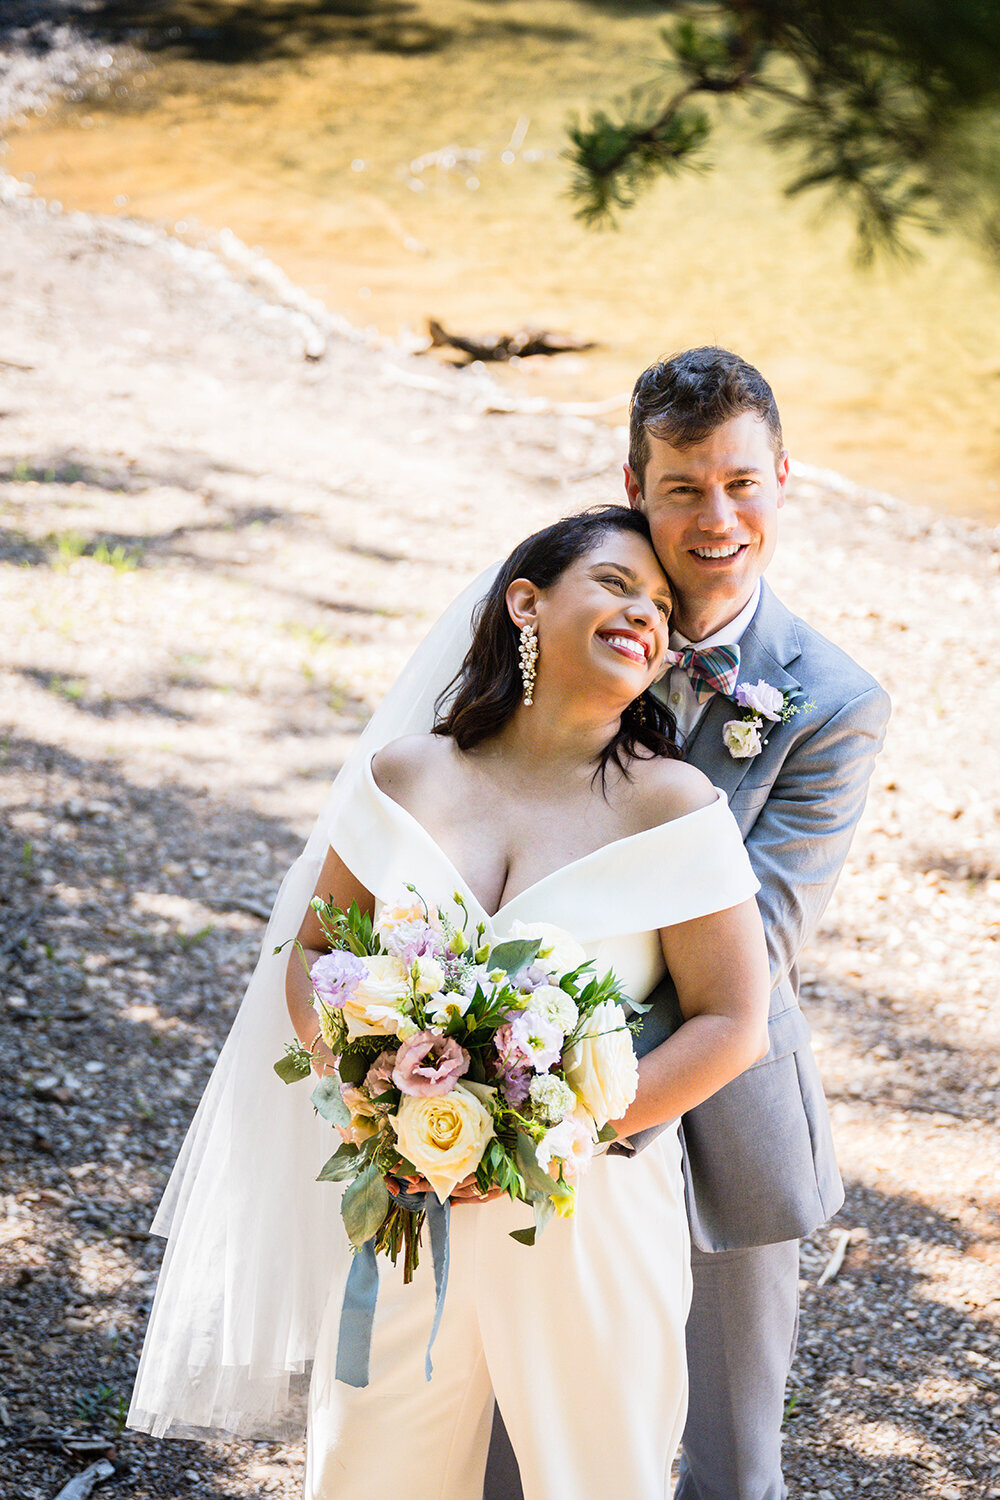 A bride stands in front of the groom and leans onto him, placing her head on his chest and holding her bouquet, while the groom looks up and smiles. The pair eloped on Carvin’s Cove in Roanoke, Virginia and are taking portraits under the shady trees.